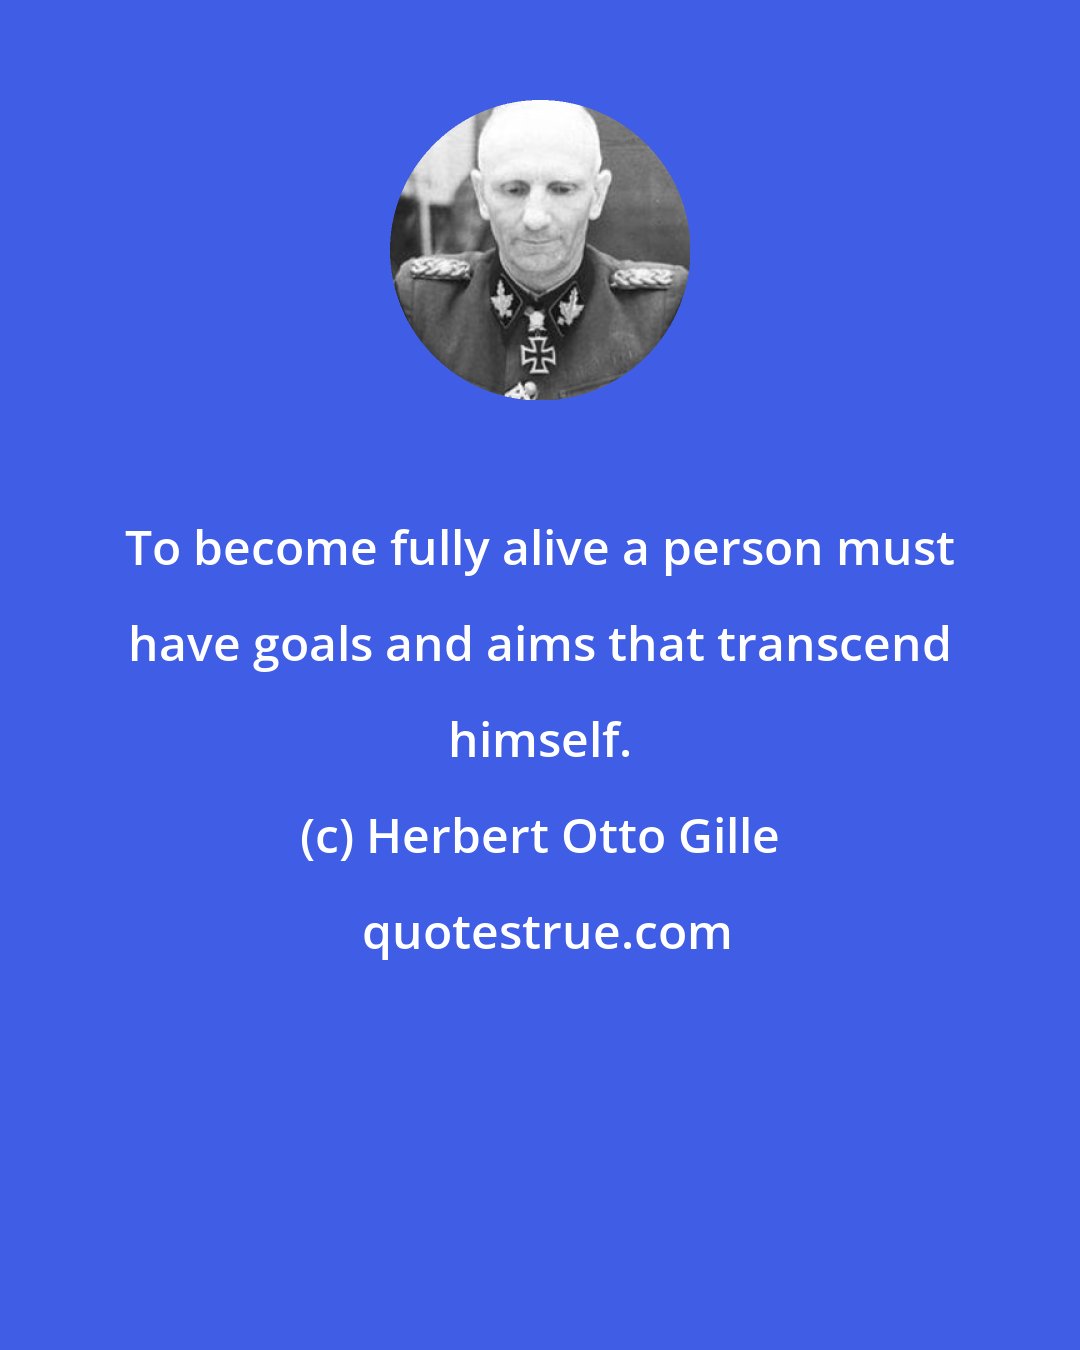 Herbert Otto Gille: To become fully alive a person must have goals and aims that transcend himself.